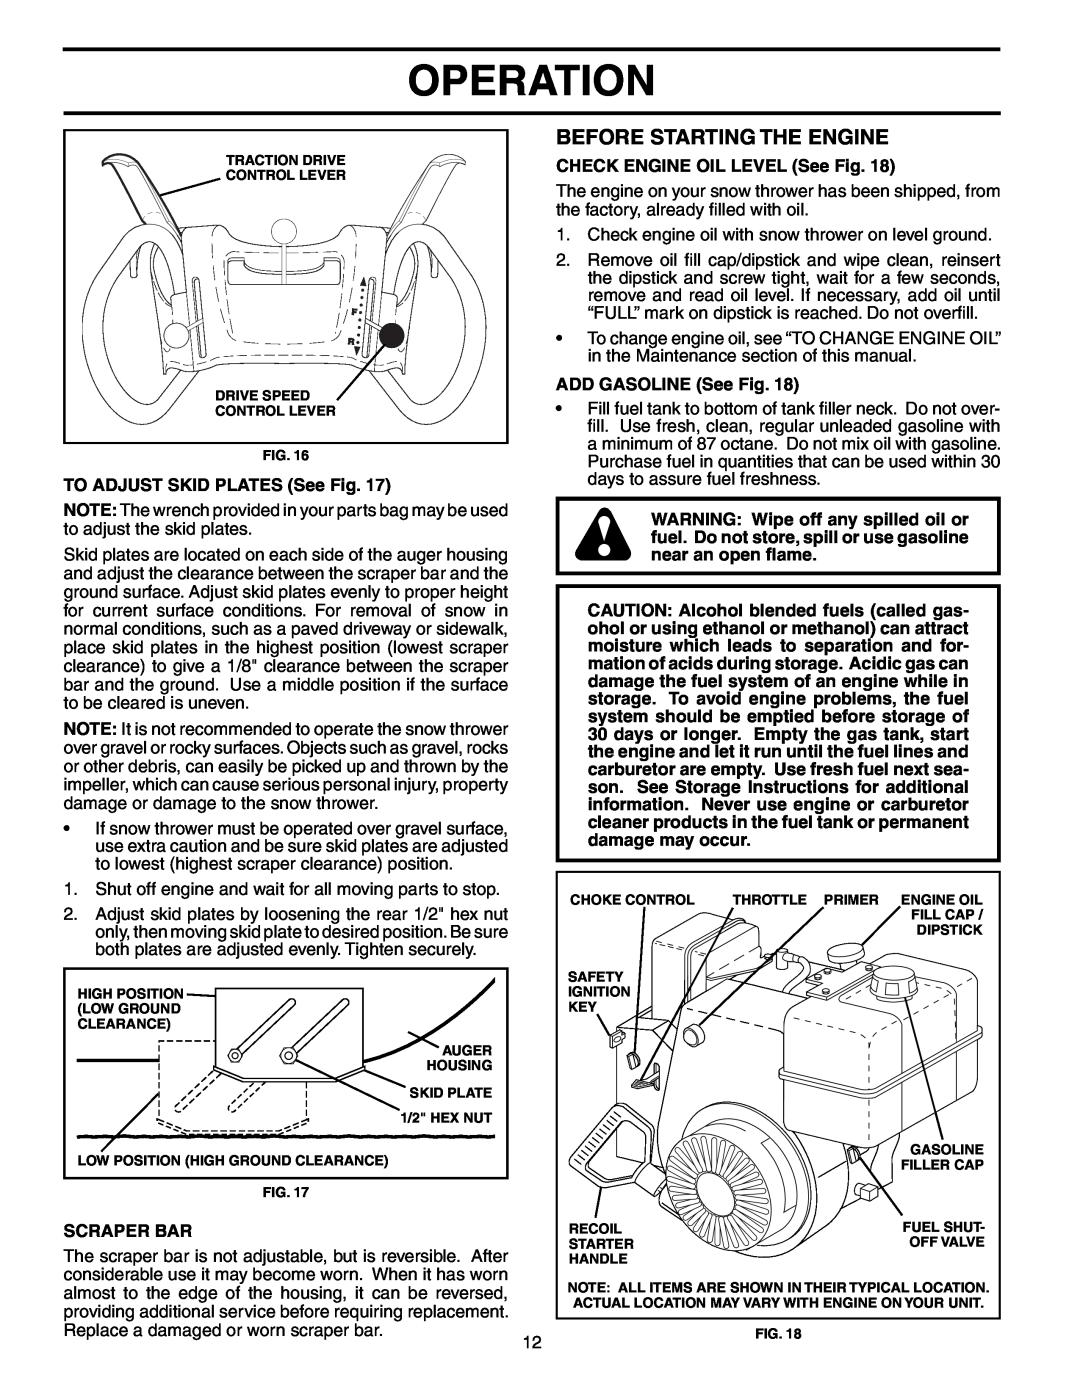 Poulan PP524B Before Starting The Engine, Operation, TO ADJUST SKID PLATES See Fig, CHECK ENGINE OIL LEVEL See Fig 